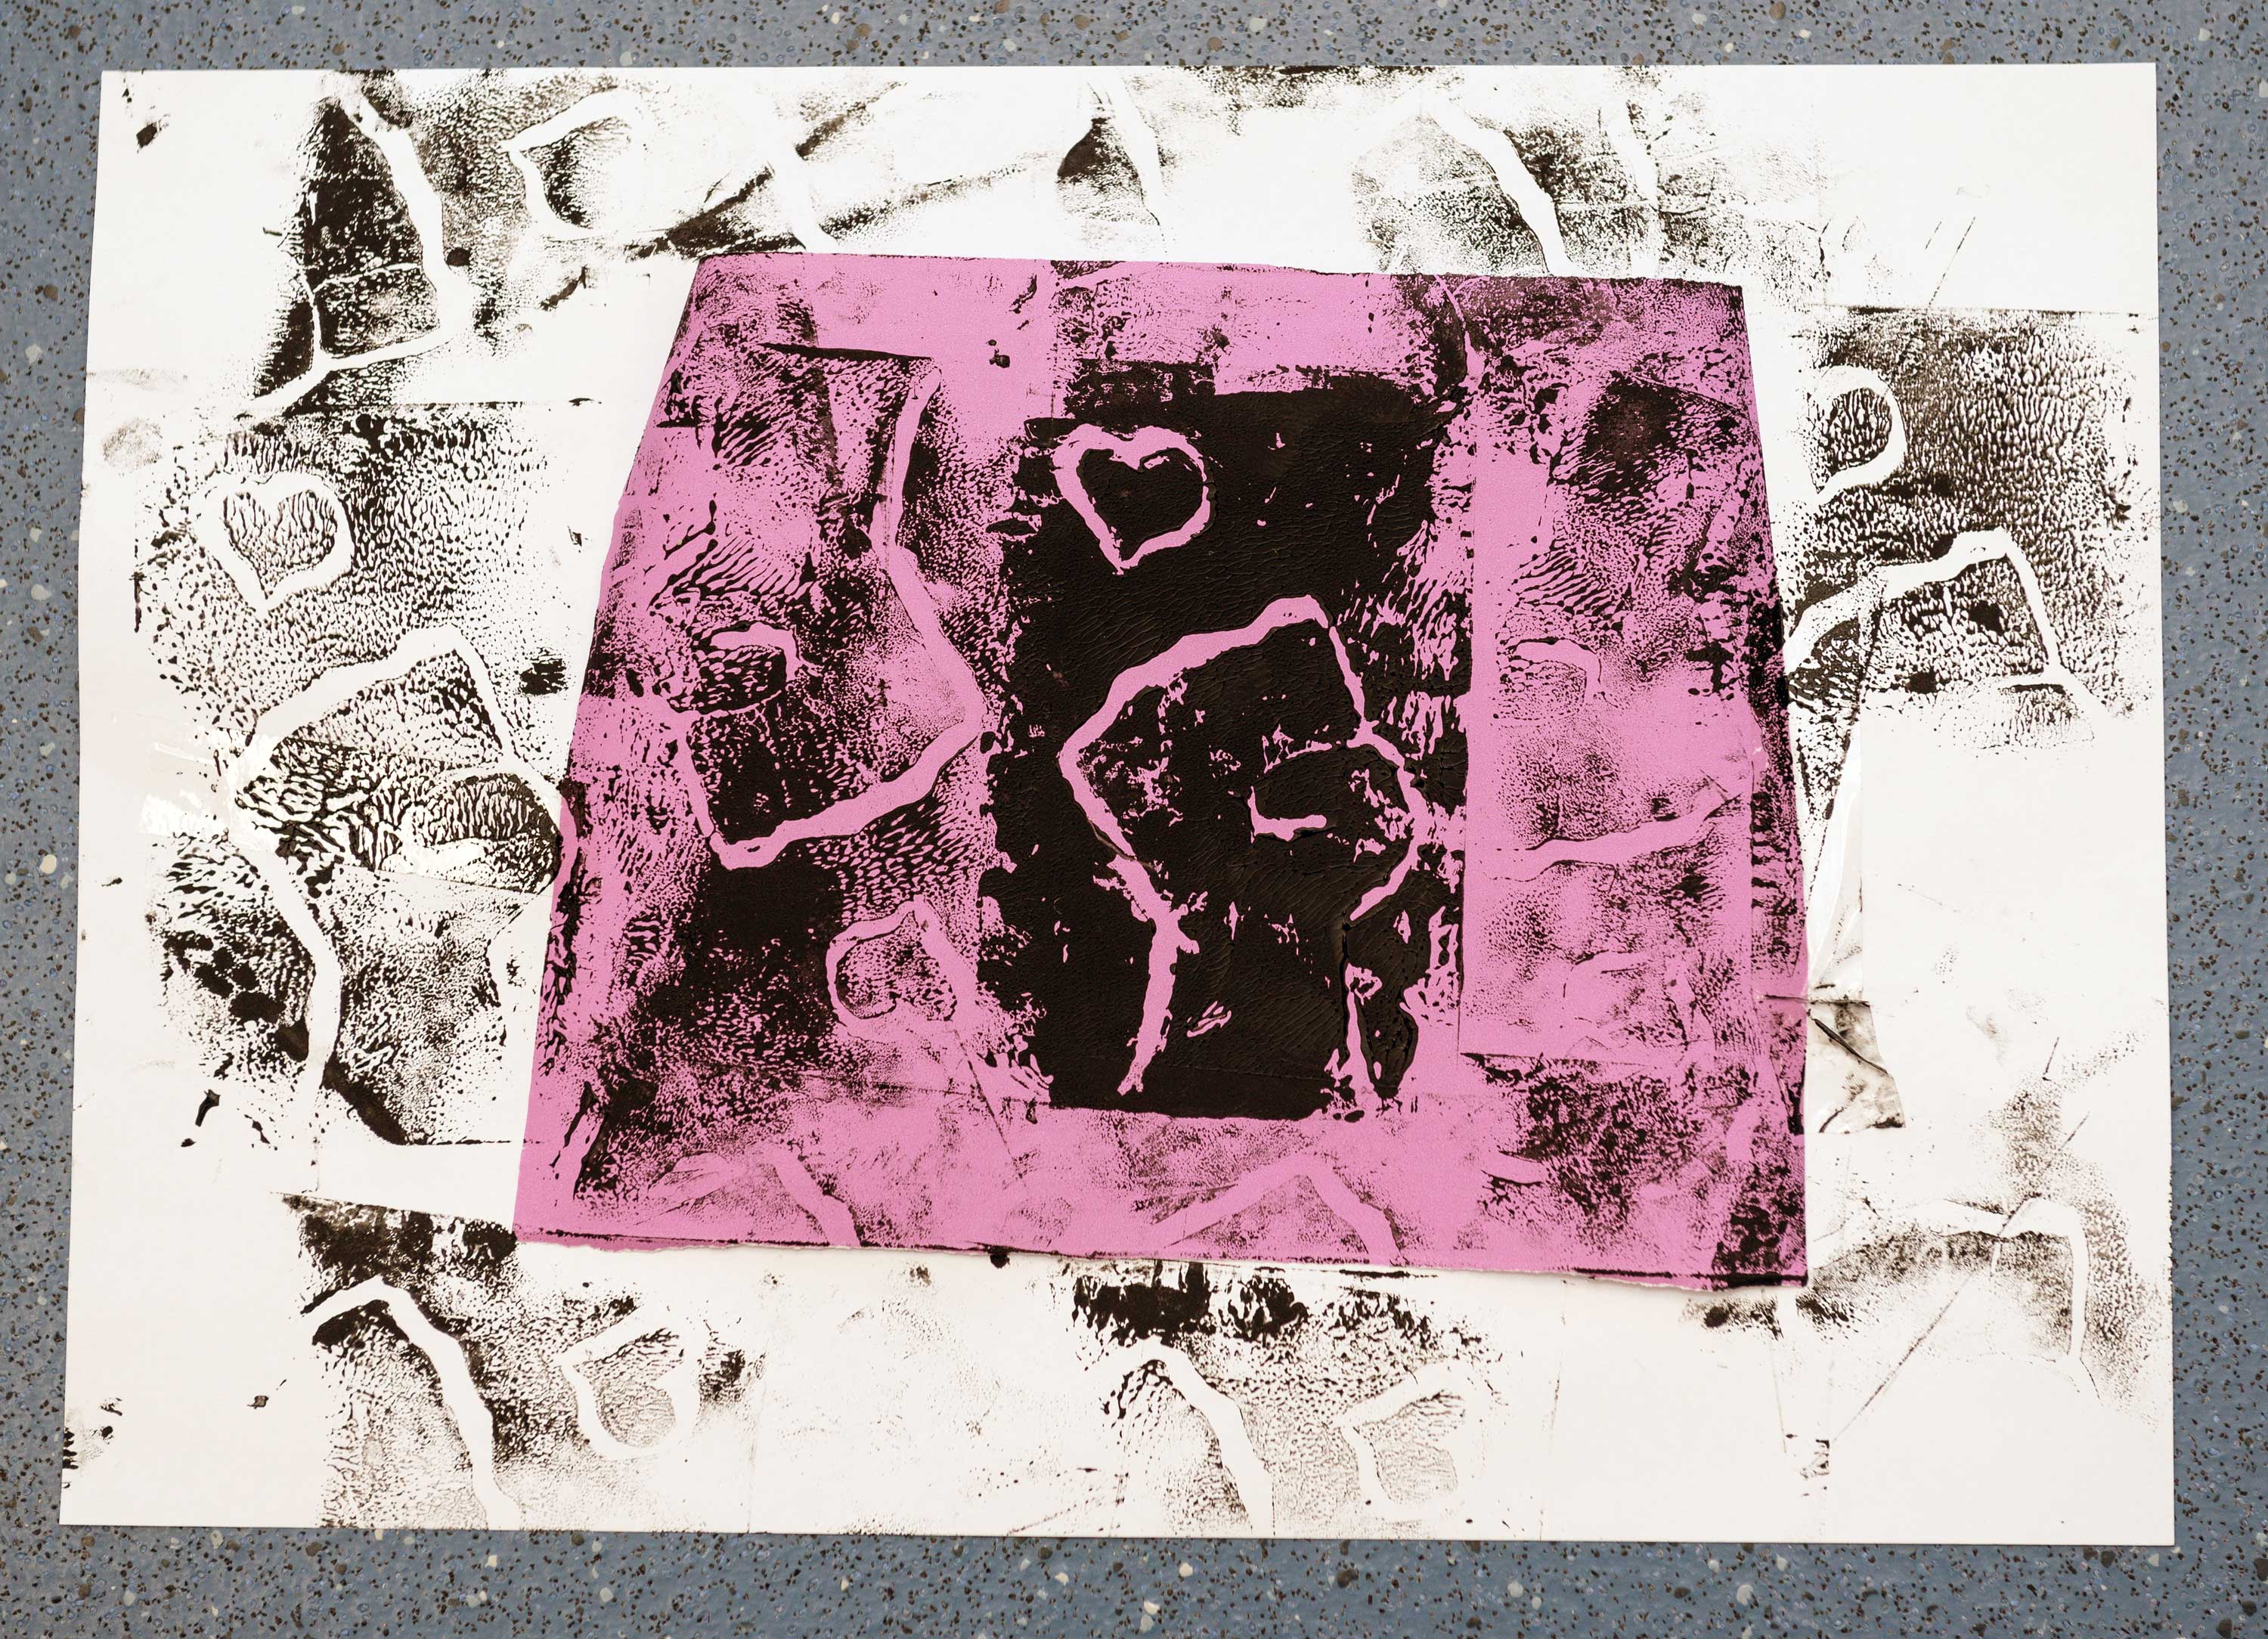 A lino print of a clenched fist using black ink on a pink and white background